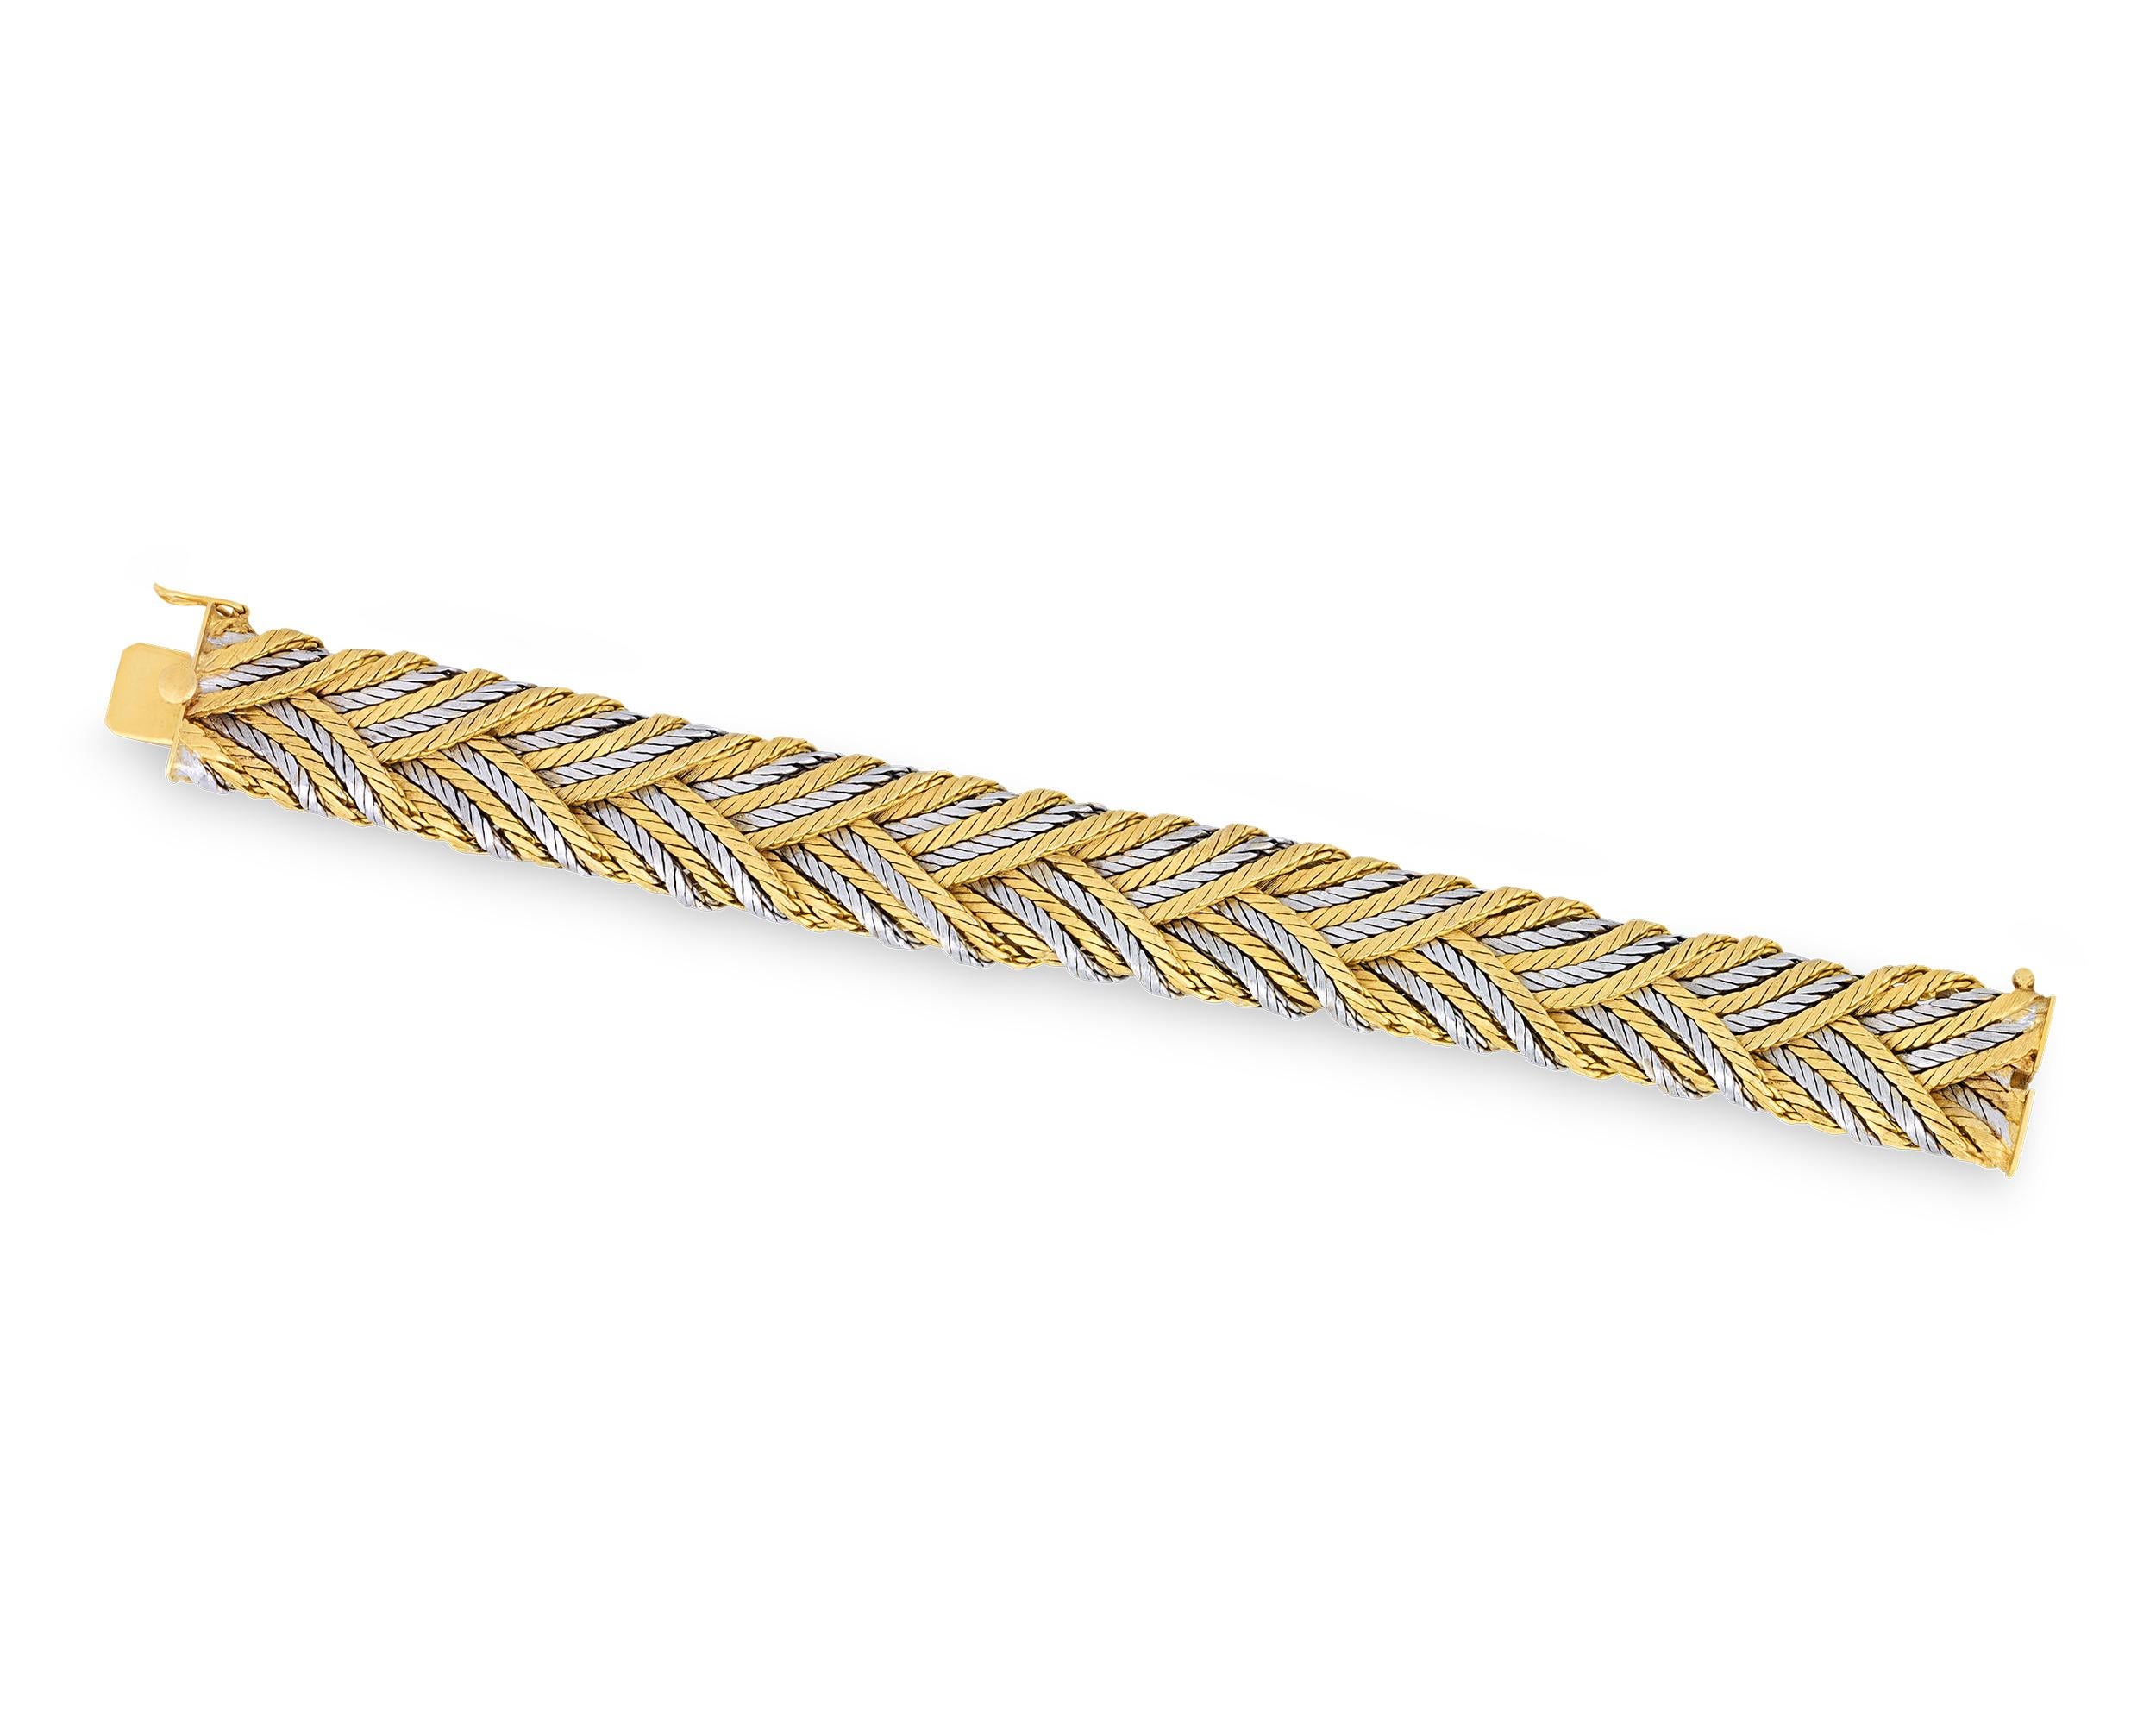 Featuring an enchanting woven design that moves elegantly across the wrist, this gold bracelet was designed by Buccellati for Tiffany & Co. Combining the warmth of 18K yellow gold with the cool tones of 18K white gold, the bi-color bracelet